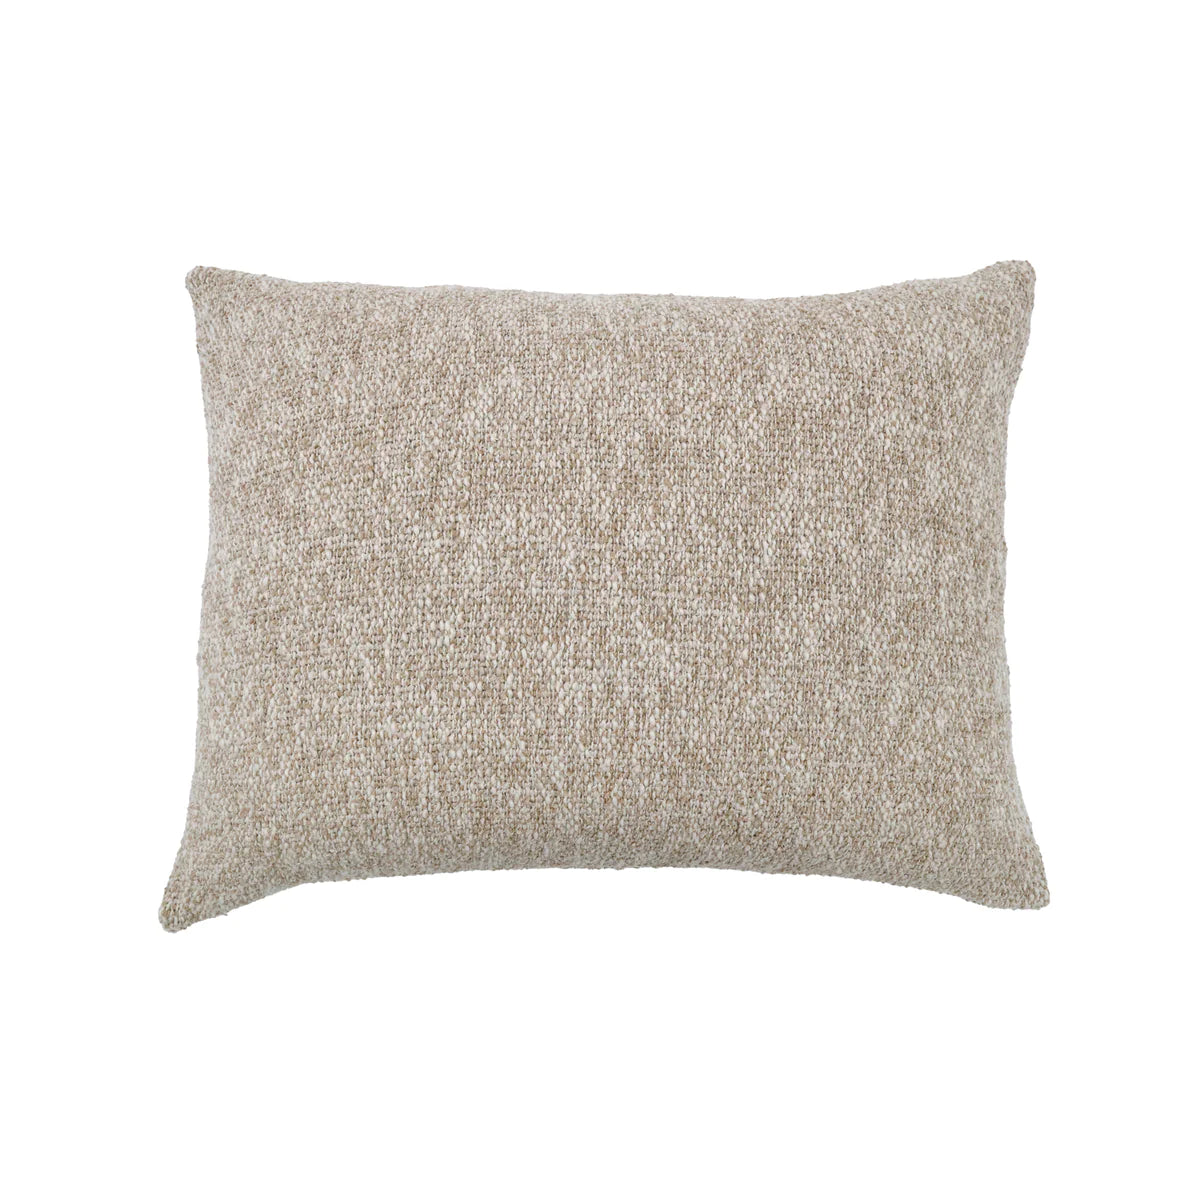 Brentwood Oversized Pillow